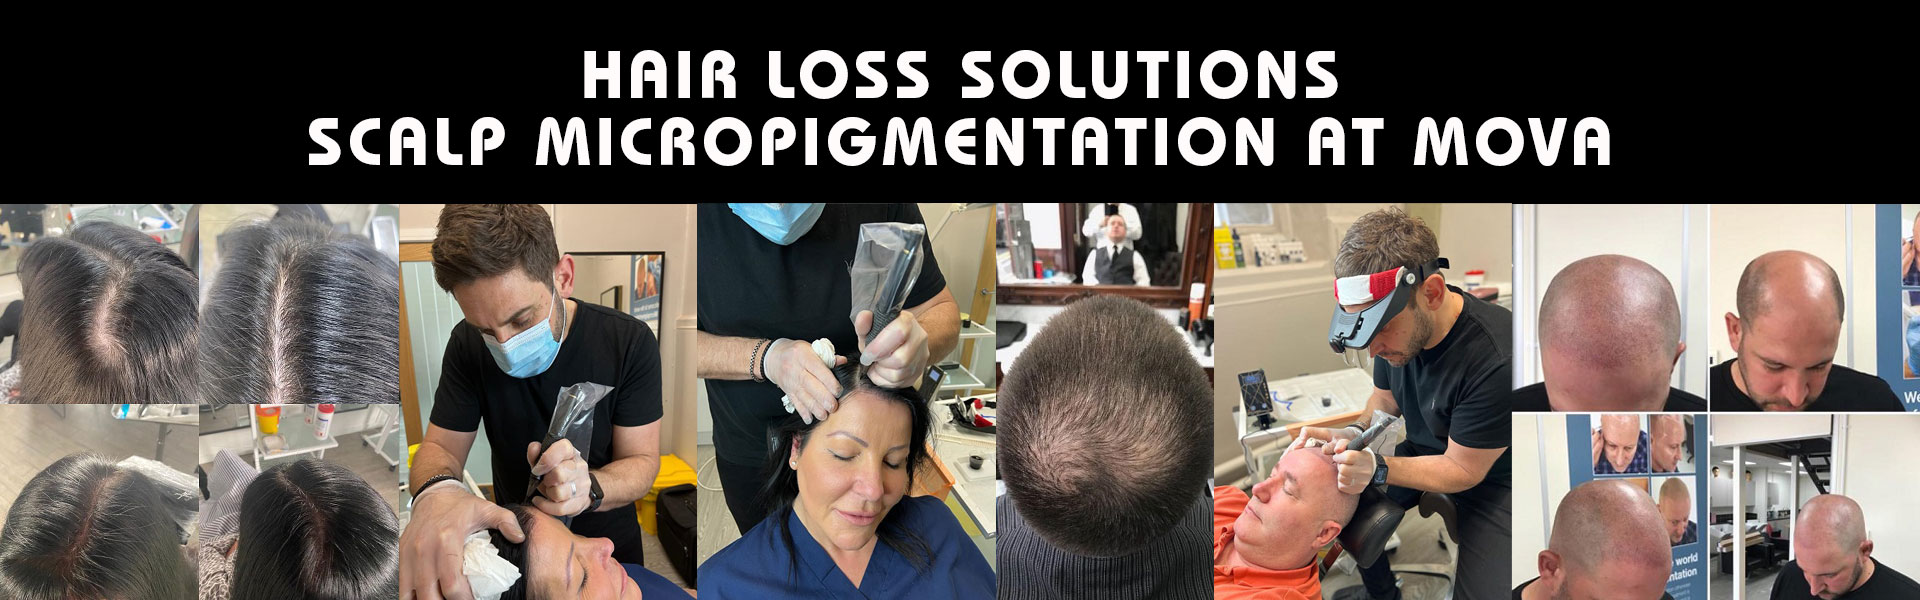 Hair Loss Solutions at Mova hairdressers in Staines upon Thames